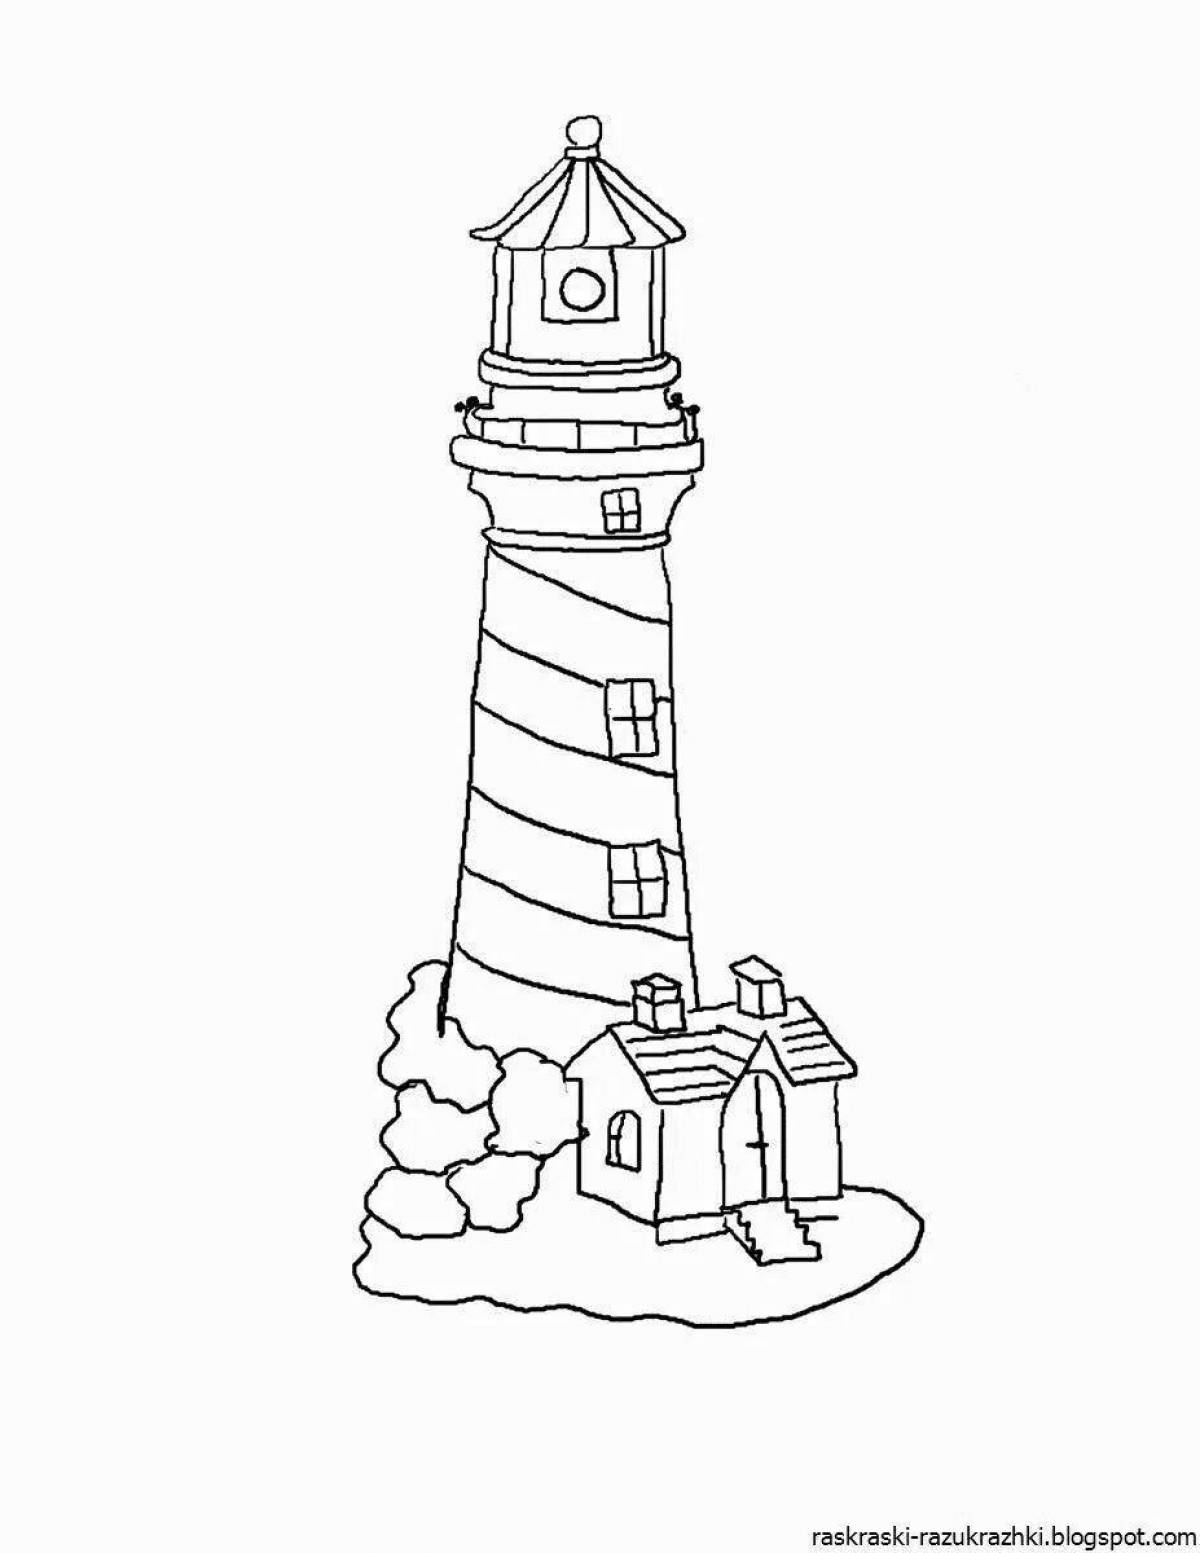 Splendid electric towers coloring pages for kids